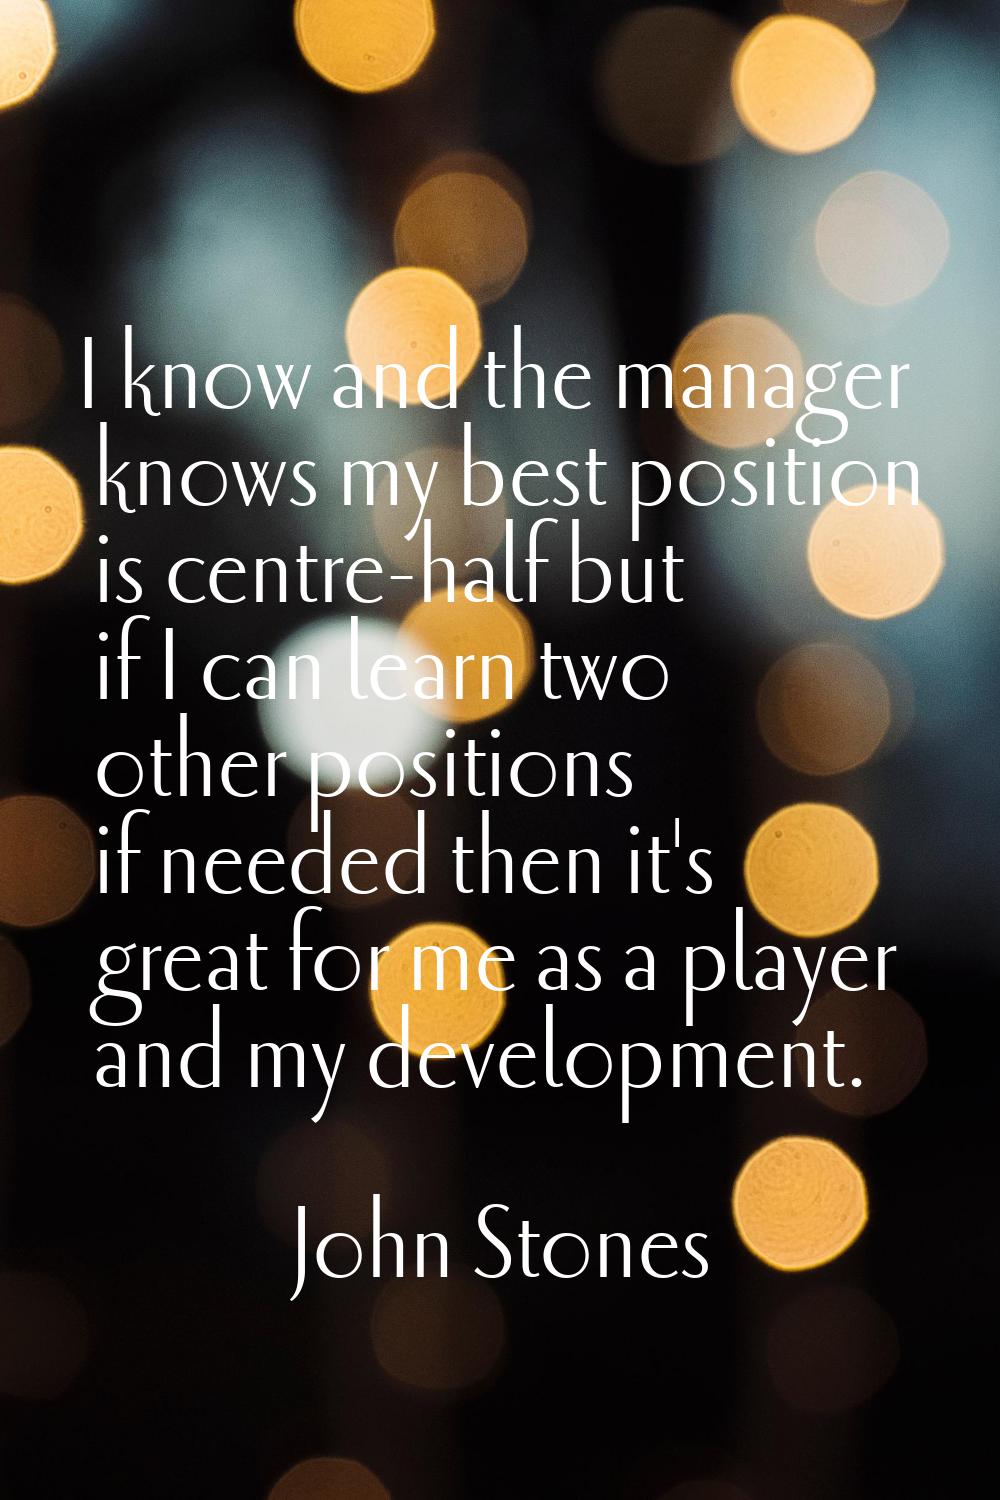 I know and the manager knows my best position is centre-half but if I can learn two other positions